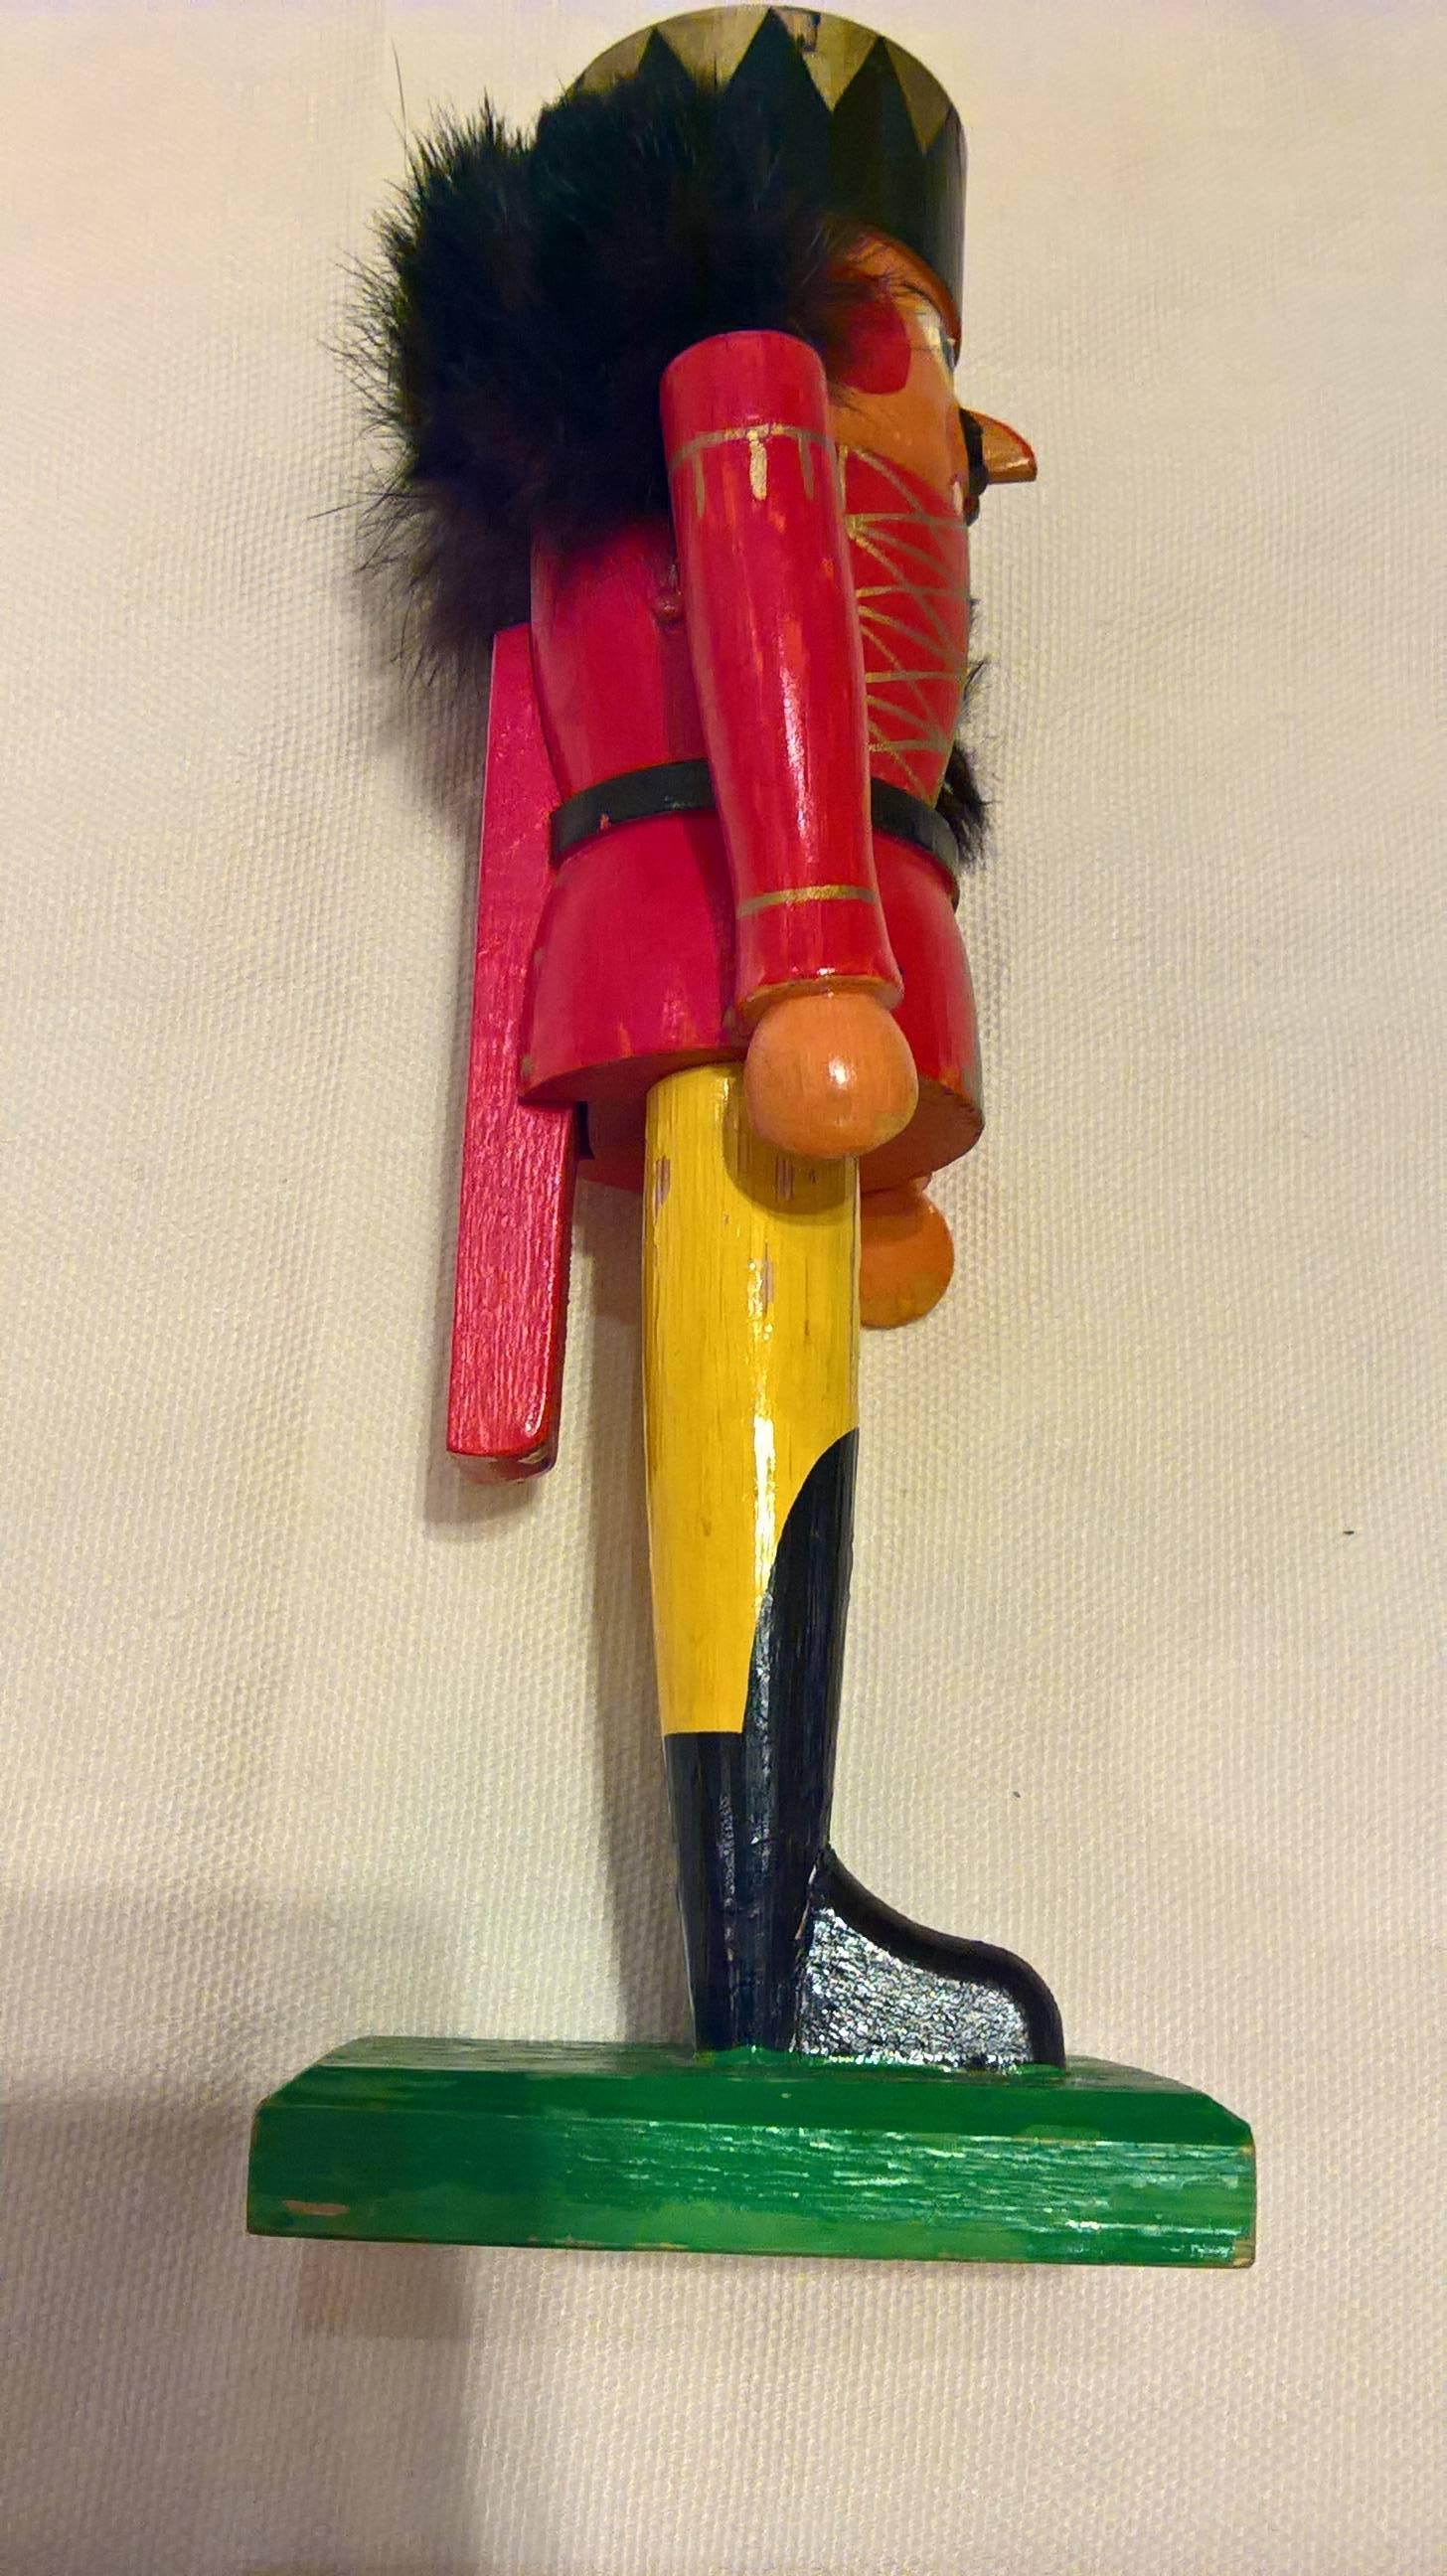 Large wooden nutcracker figure from the Erzgebirge. The region Erzgebirge formerly Eastern Germany is famous for this special kind of nutcrackers, where intricate carving has been their home. Completely hand-painted and decorated with faux fur.